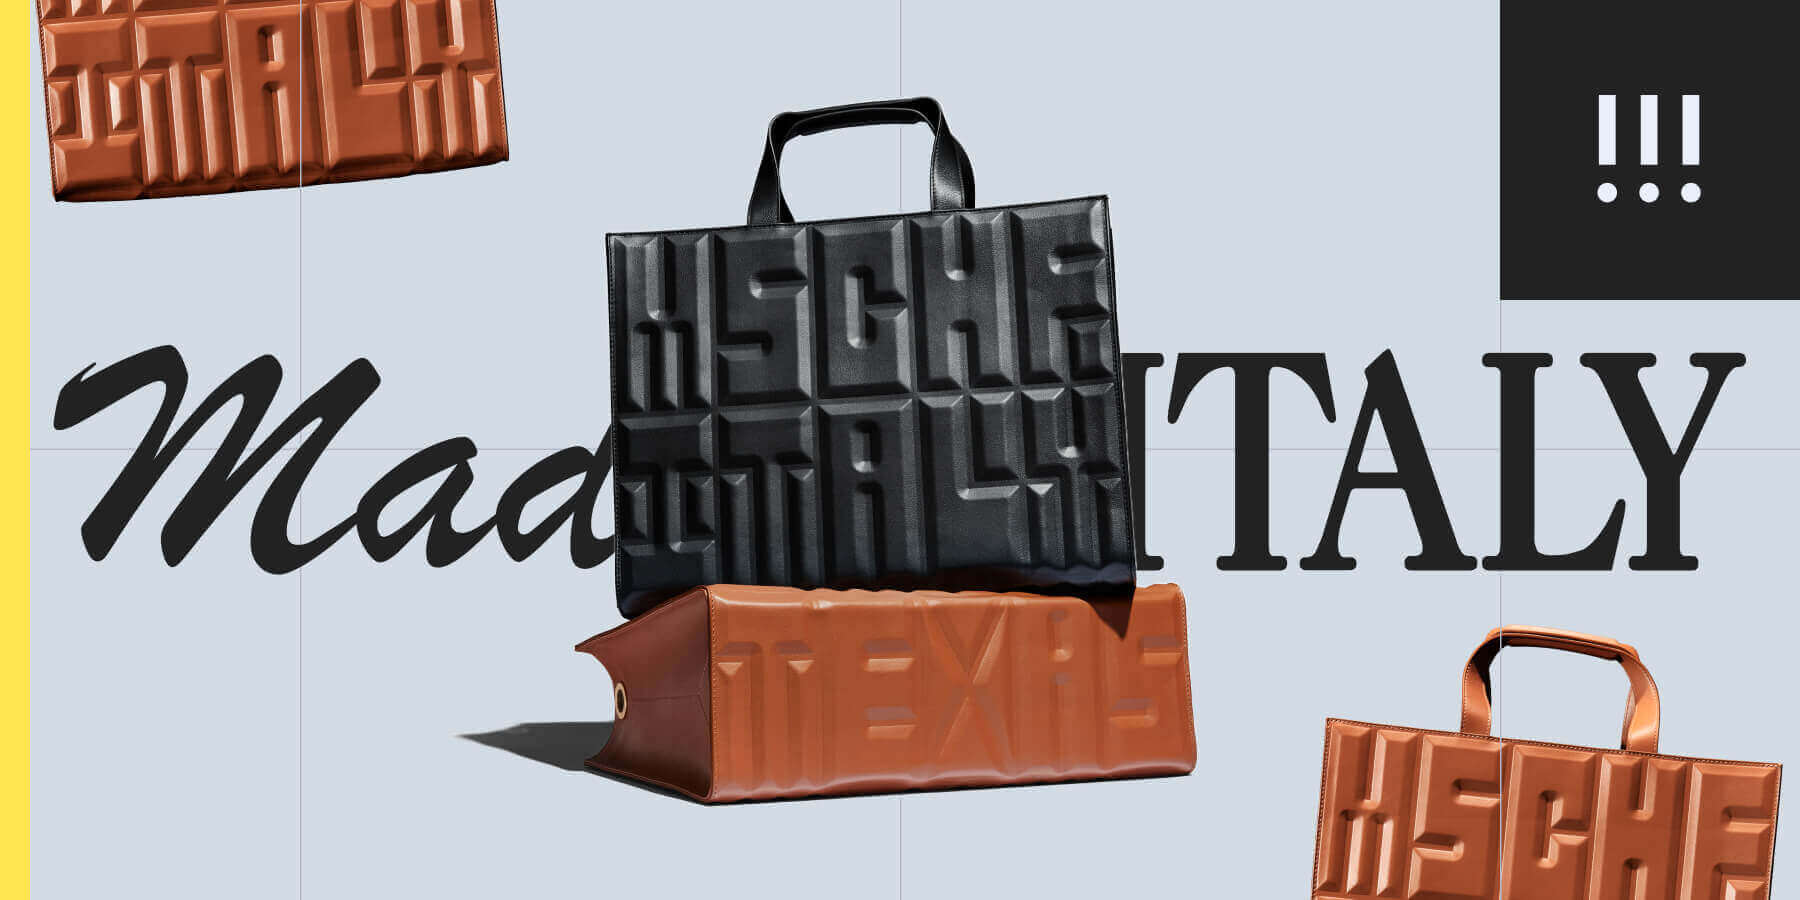 The Texan 'Made in Italy' of MSCHF's new it-bag